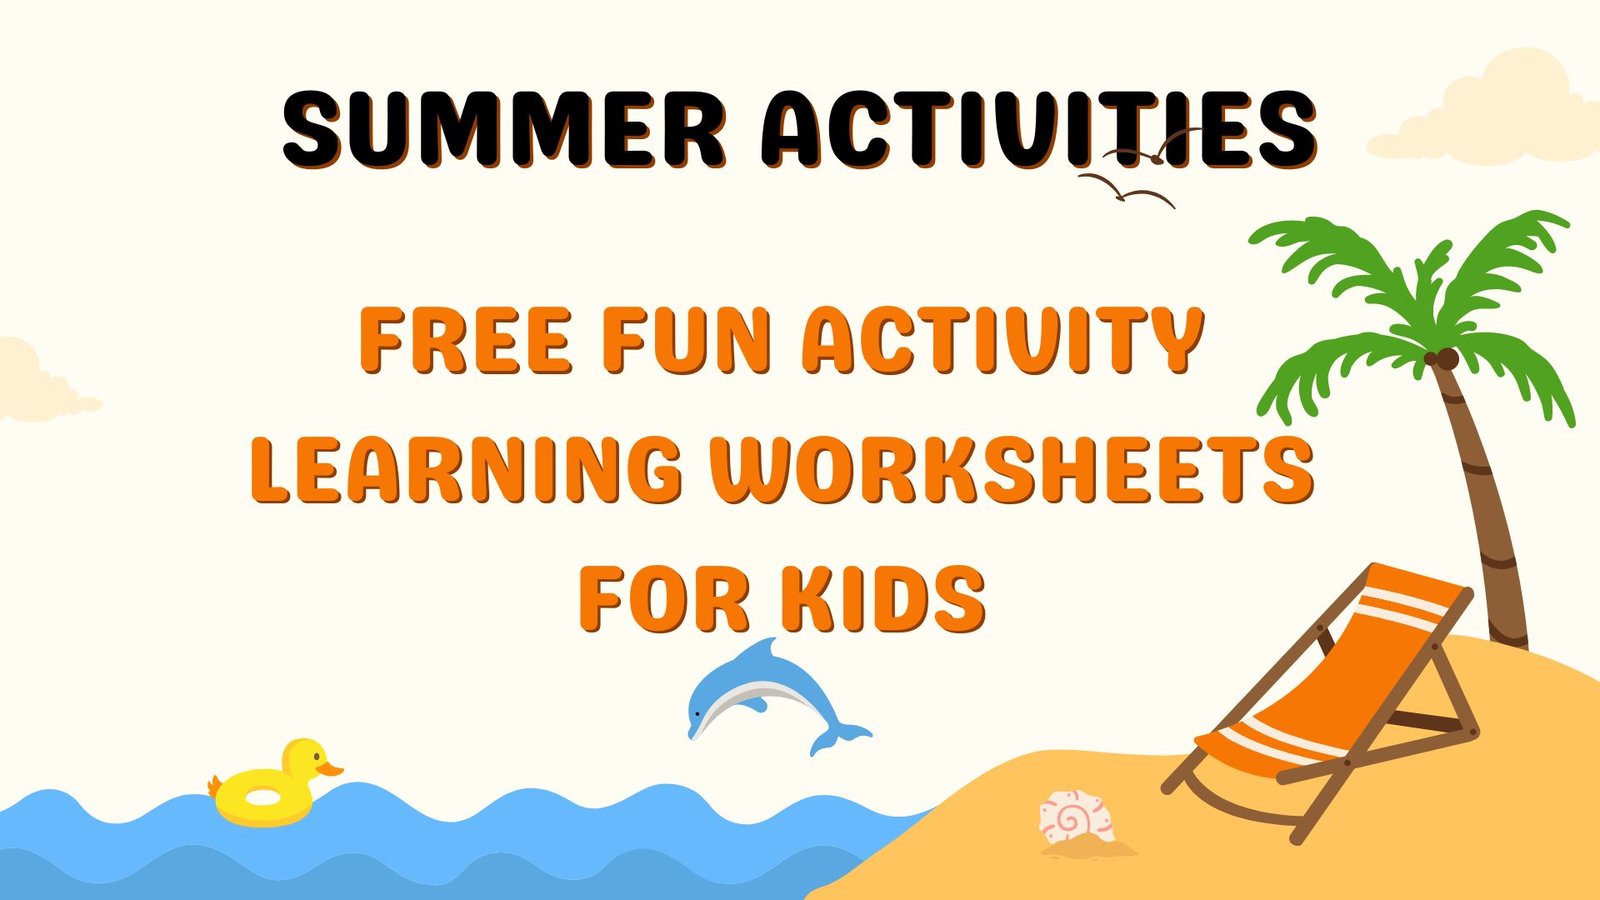 Free Fun activity learning worksheets for kids